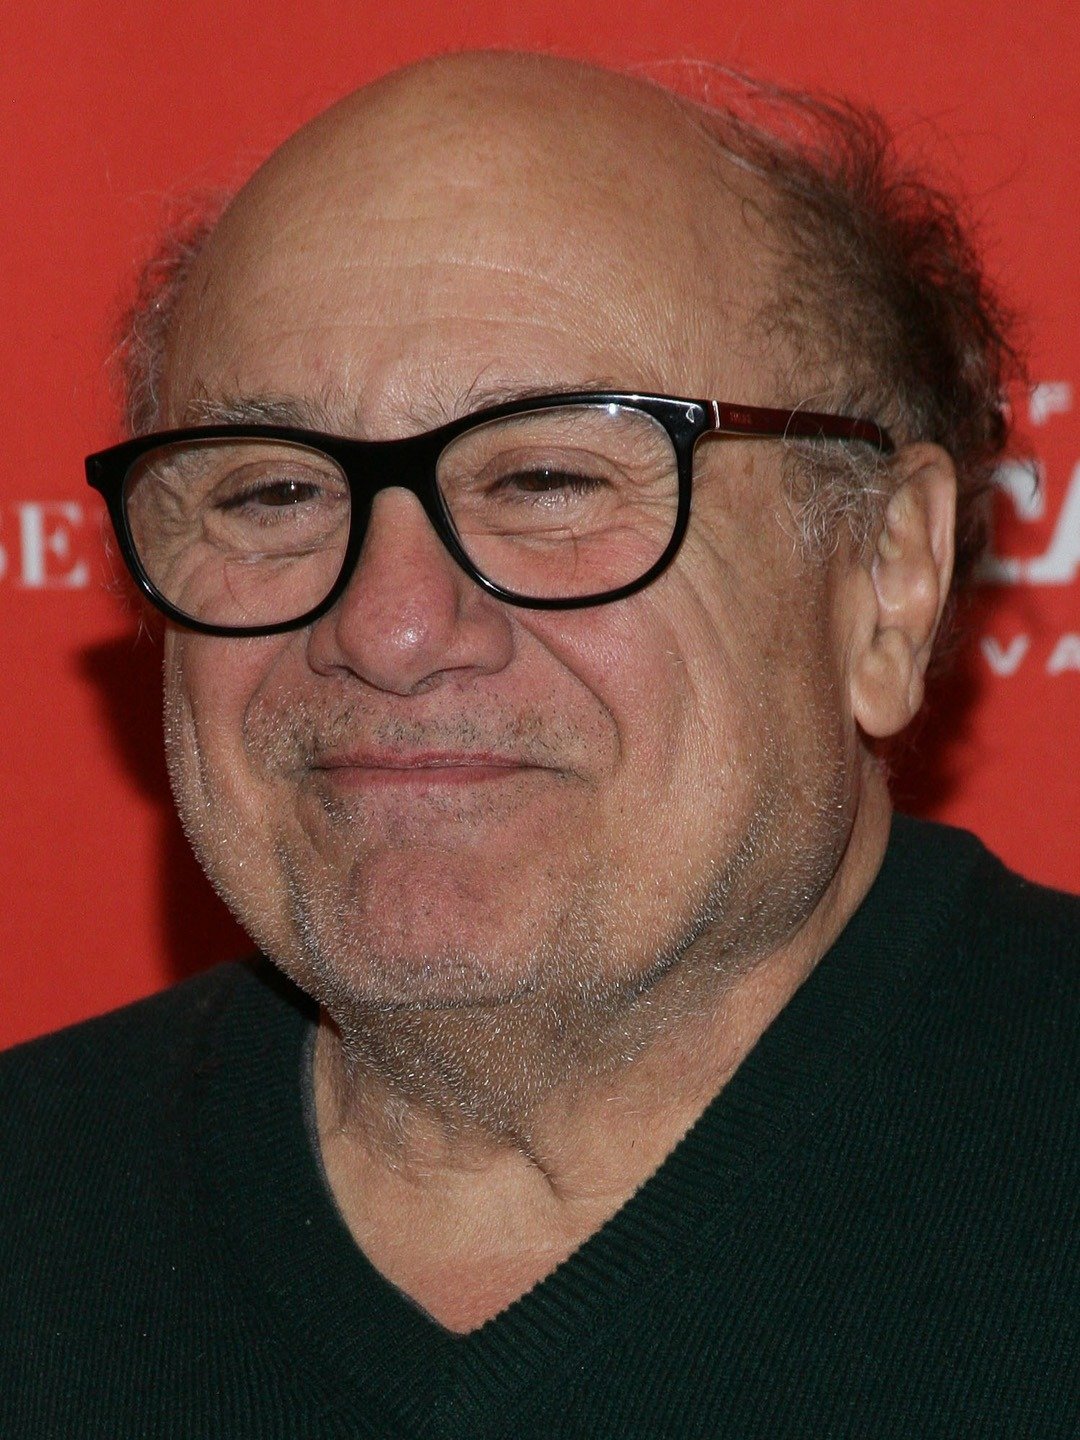 How tall is Danny DeVito?